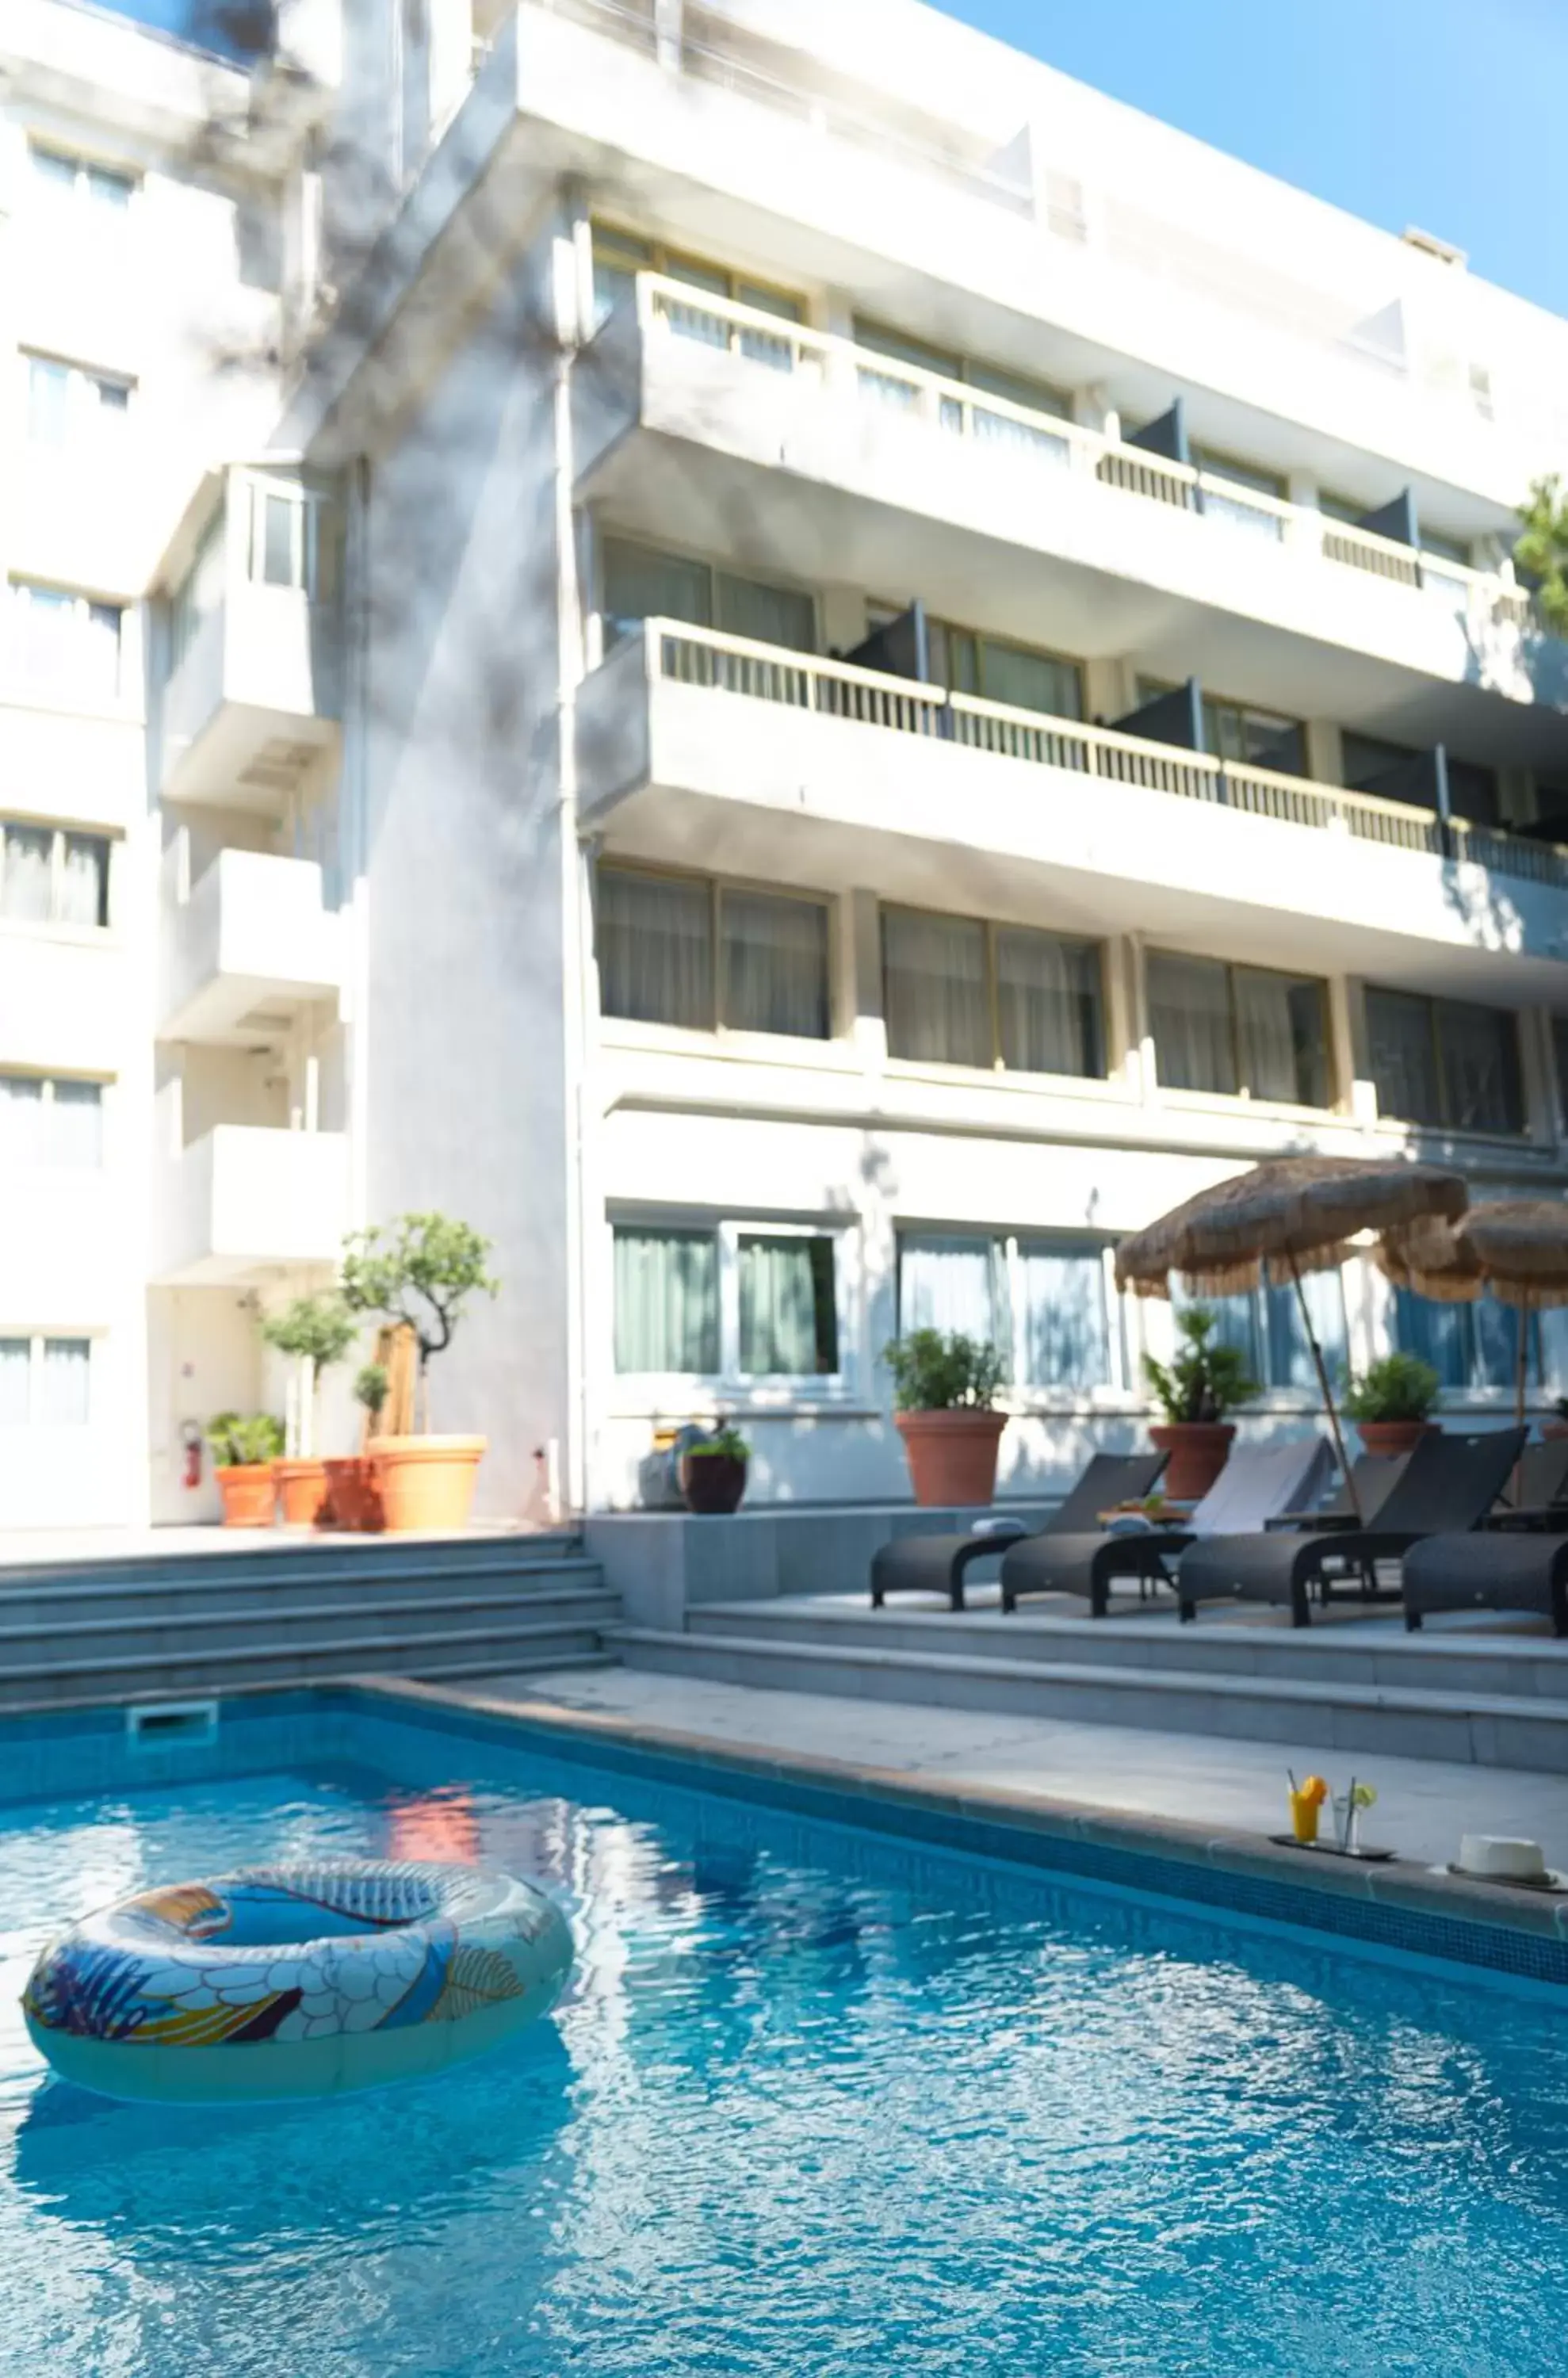 Pool view, Property Building in Juliana Hotel Cannes